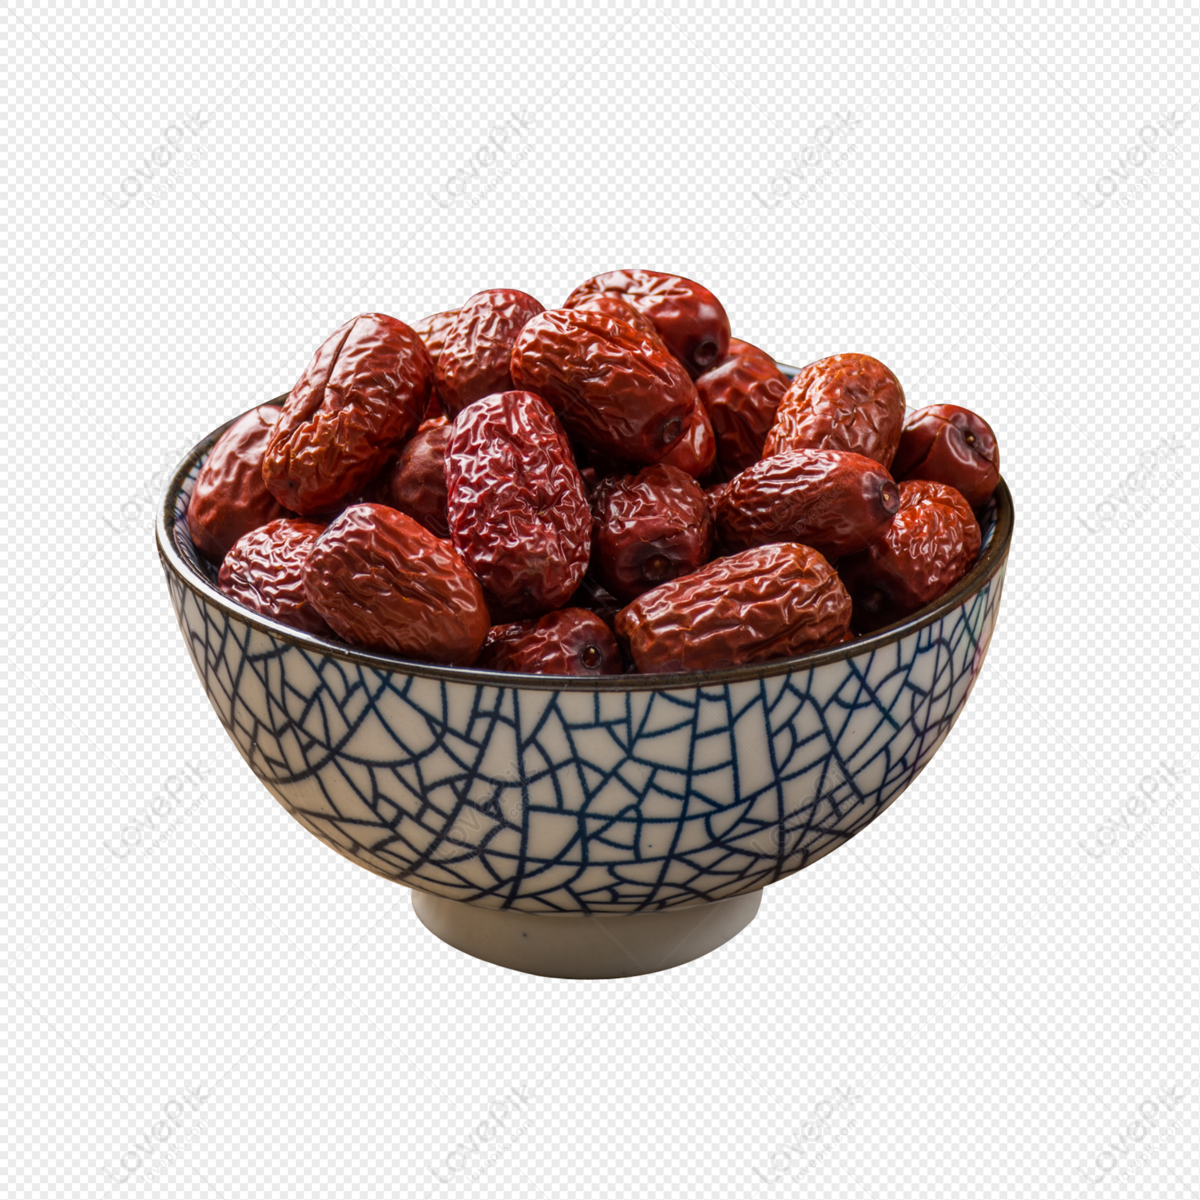 Red Dates PNG Picture And Clipart Image For Free Download - Lovepik ...